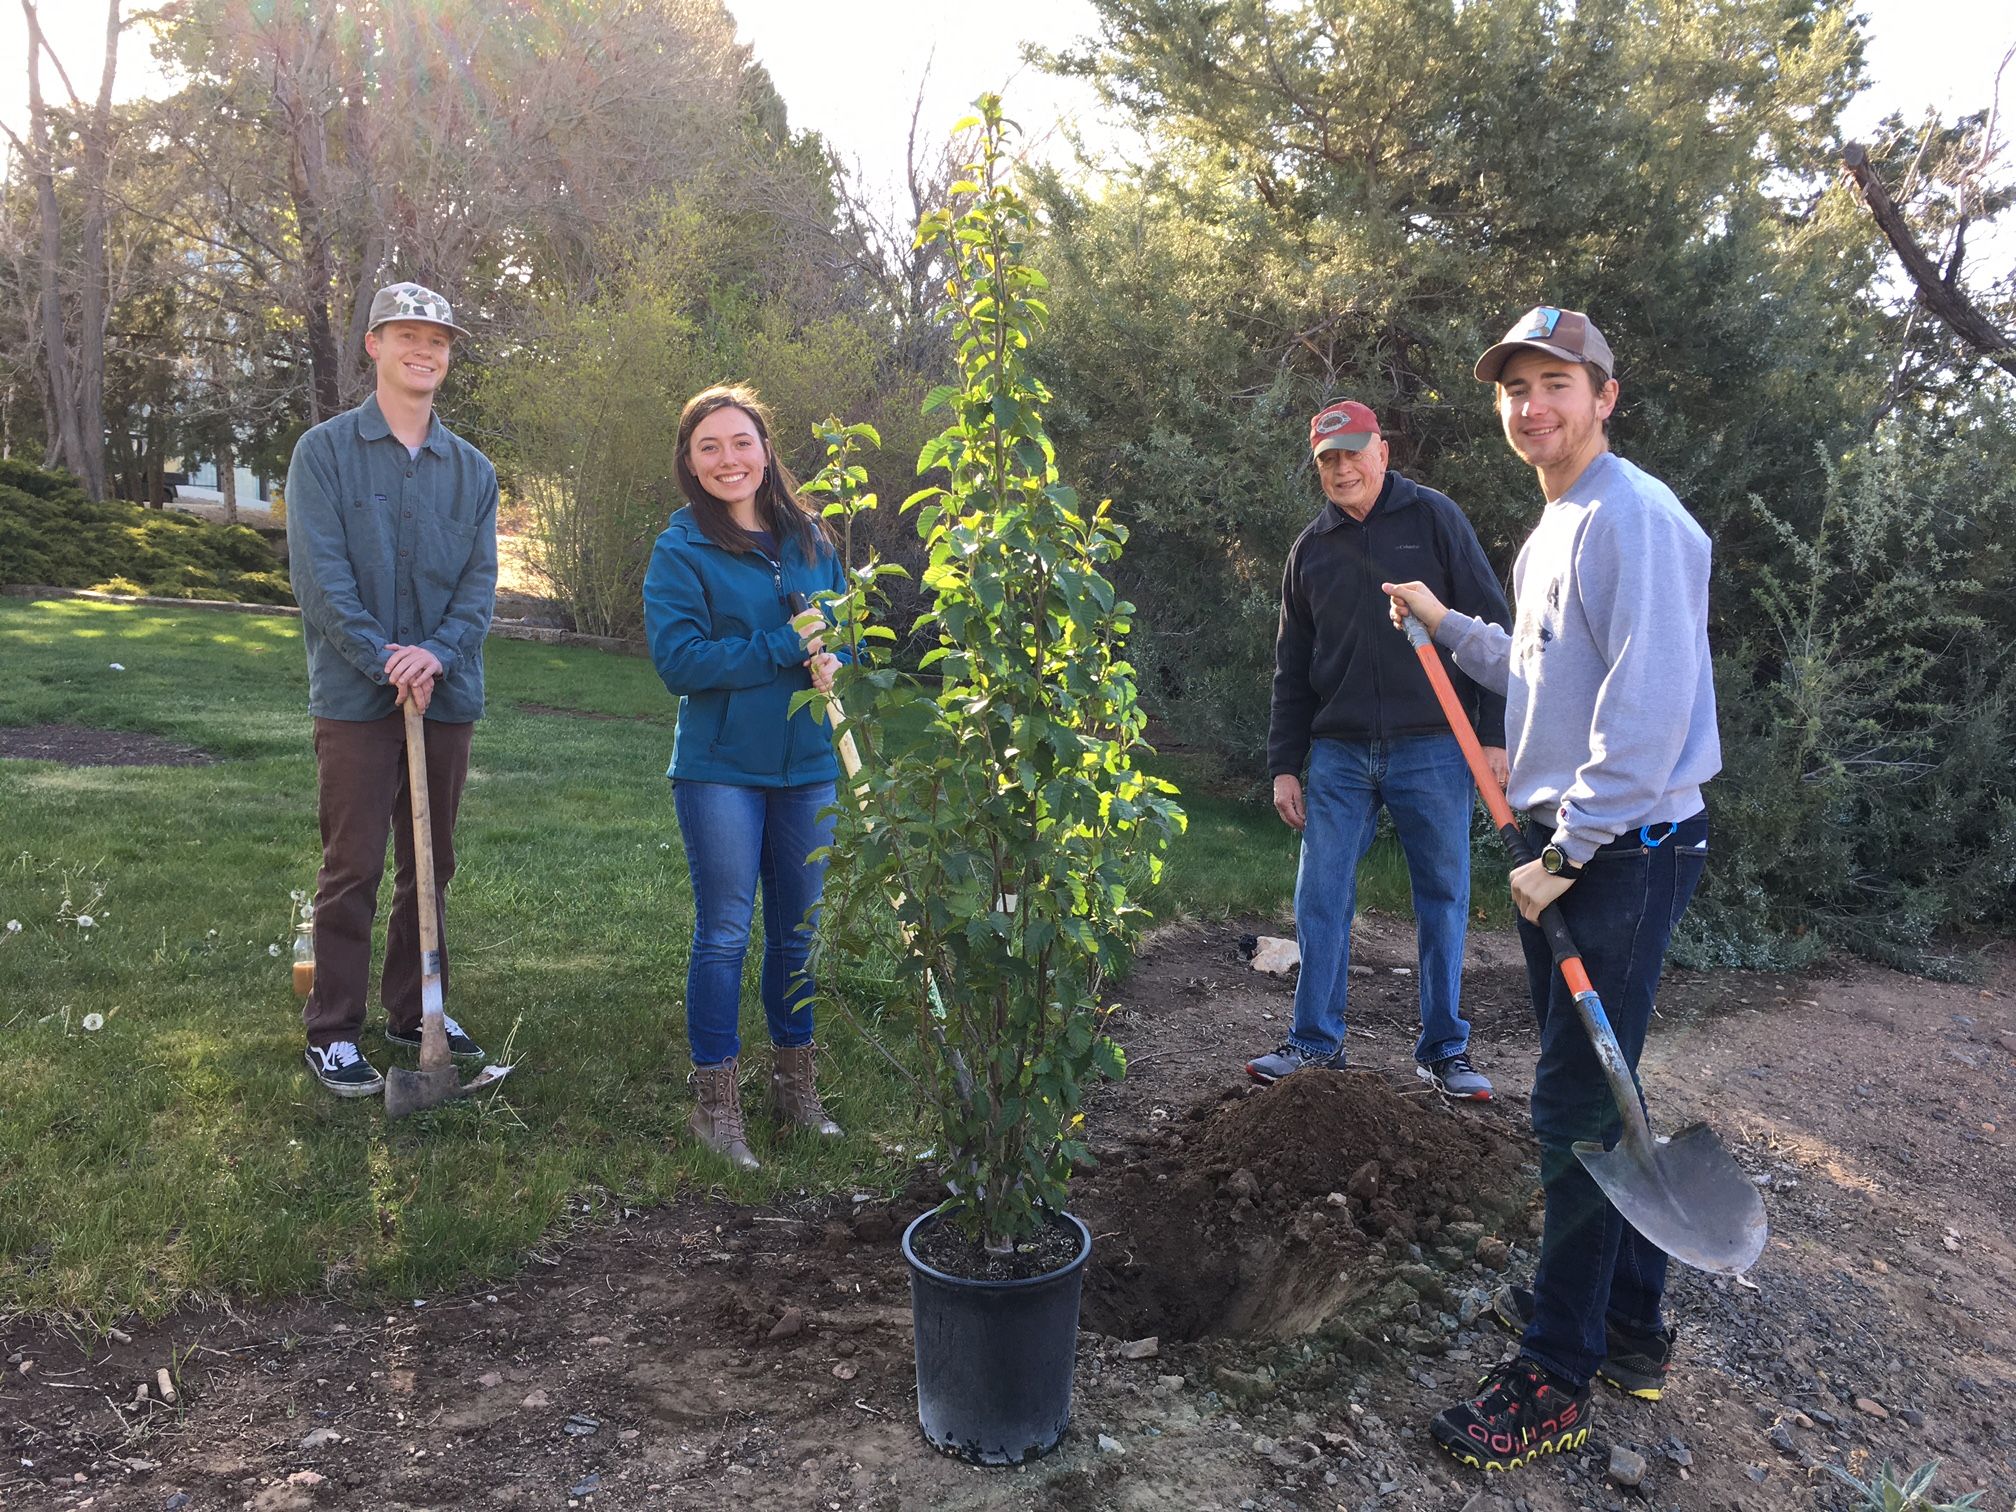 Four volunteers planting a tree during an Arbor Day event. Three of them are holding shovels, while posing around a tree about to be planted. 